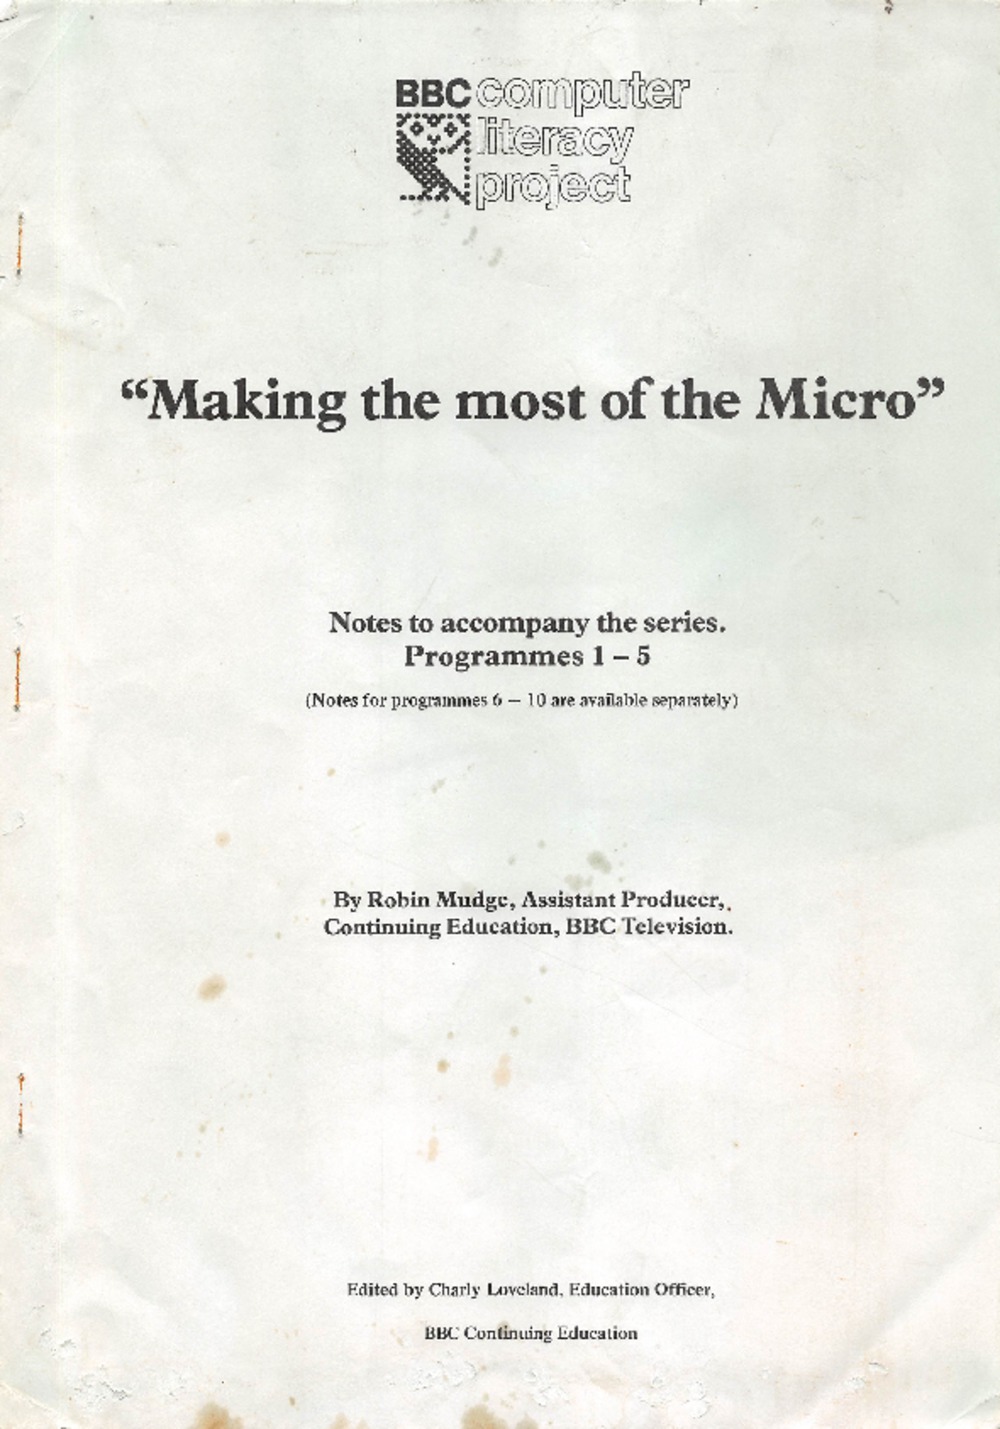 Article: Making the most of the Micro - Accompanying Notes - Programmes 1-5